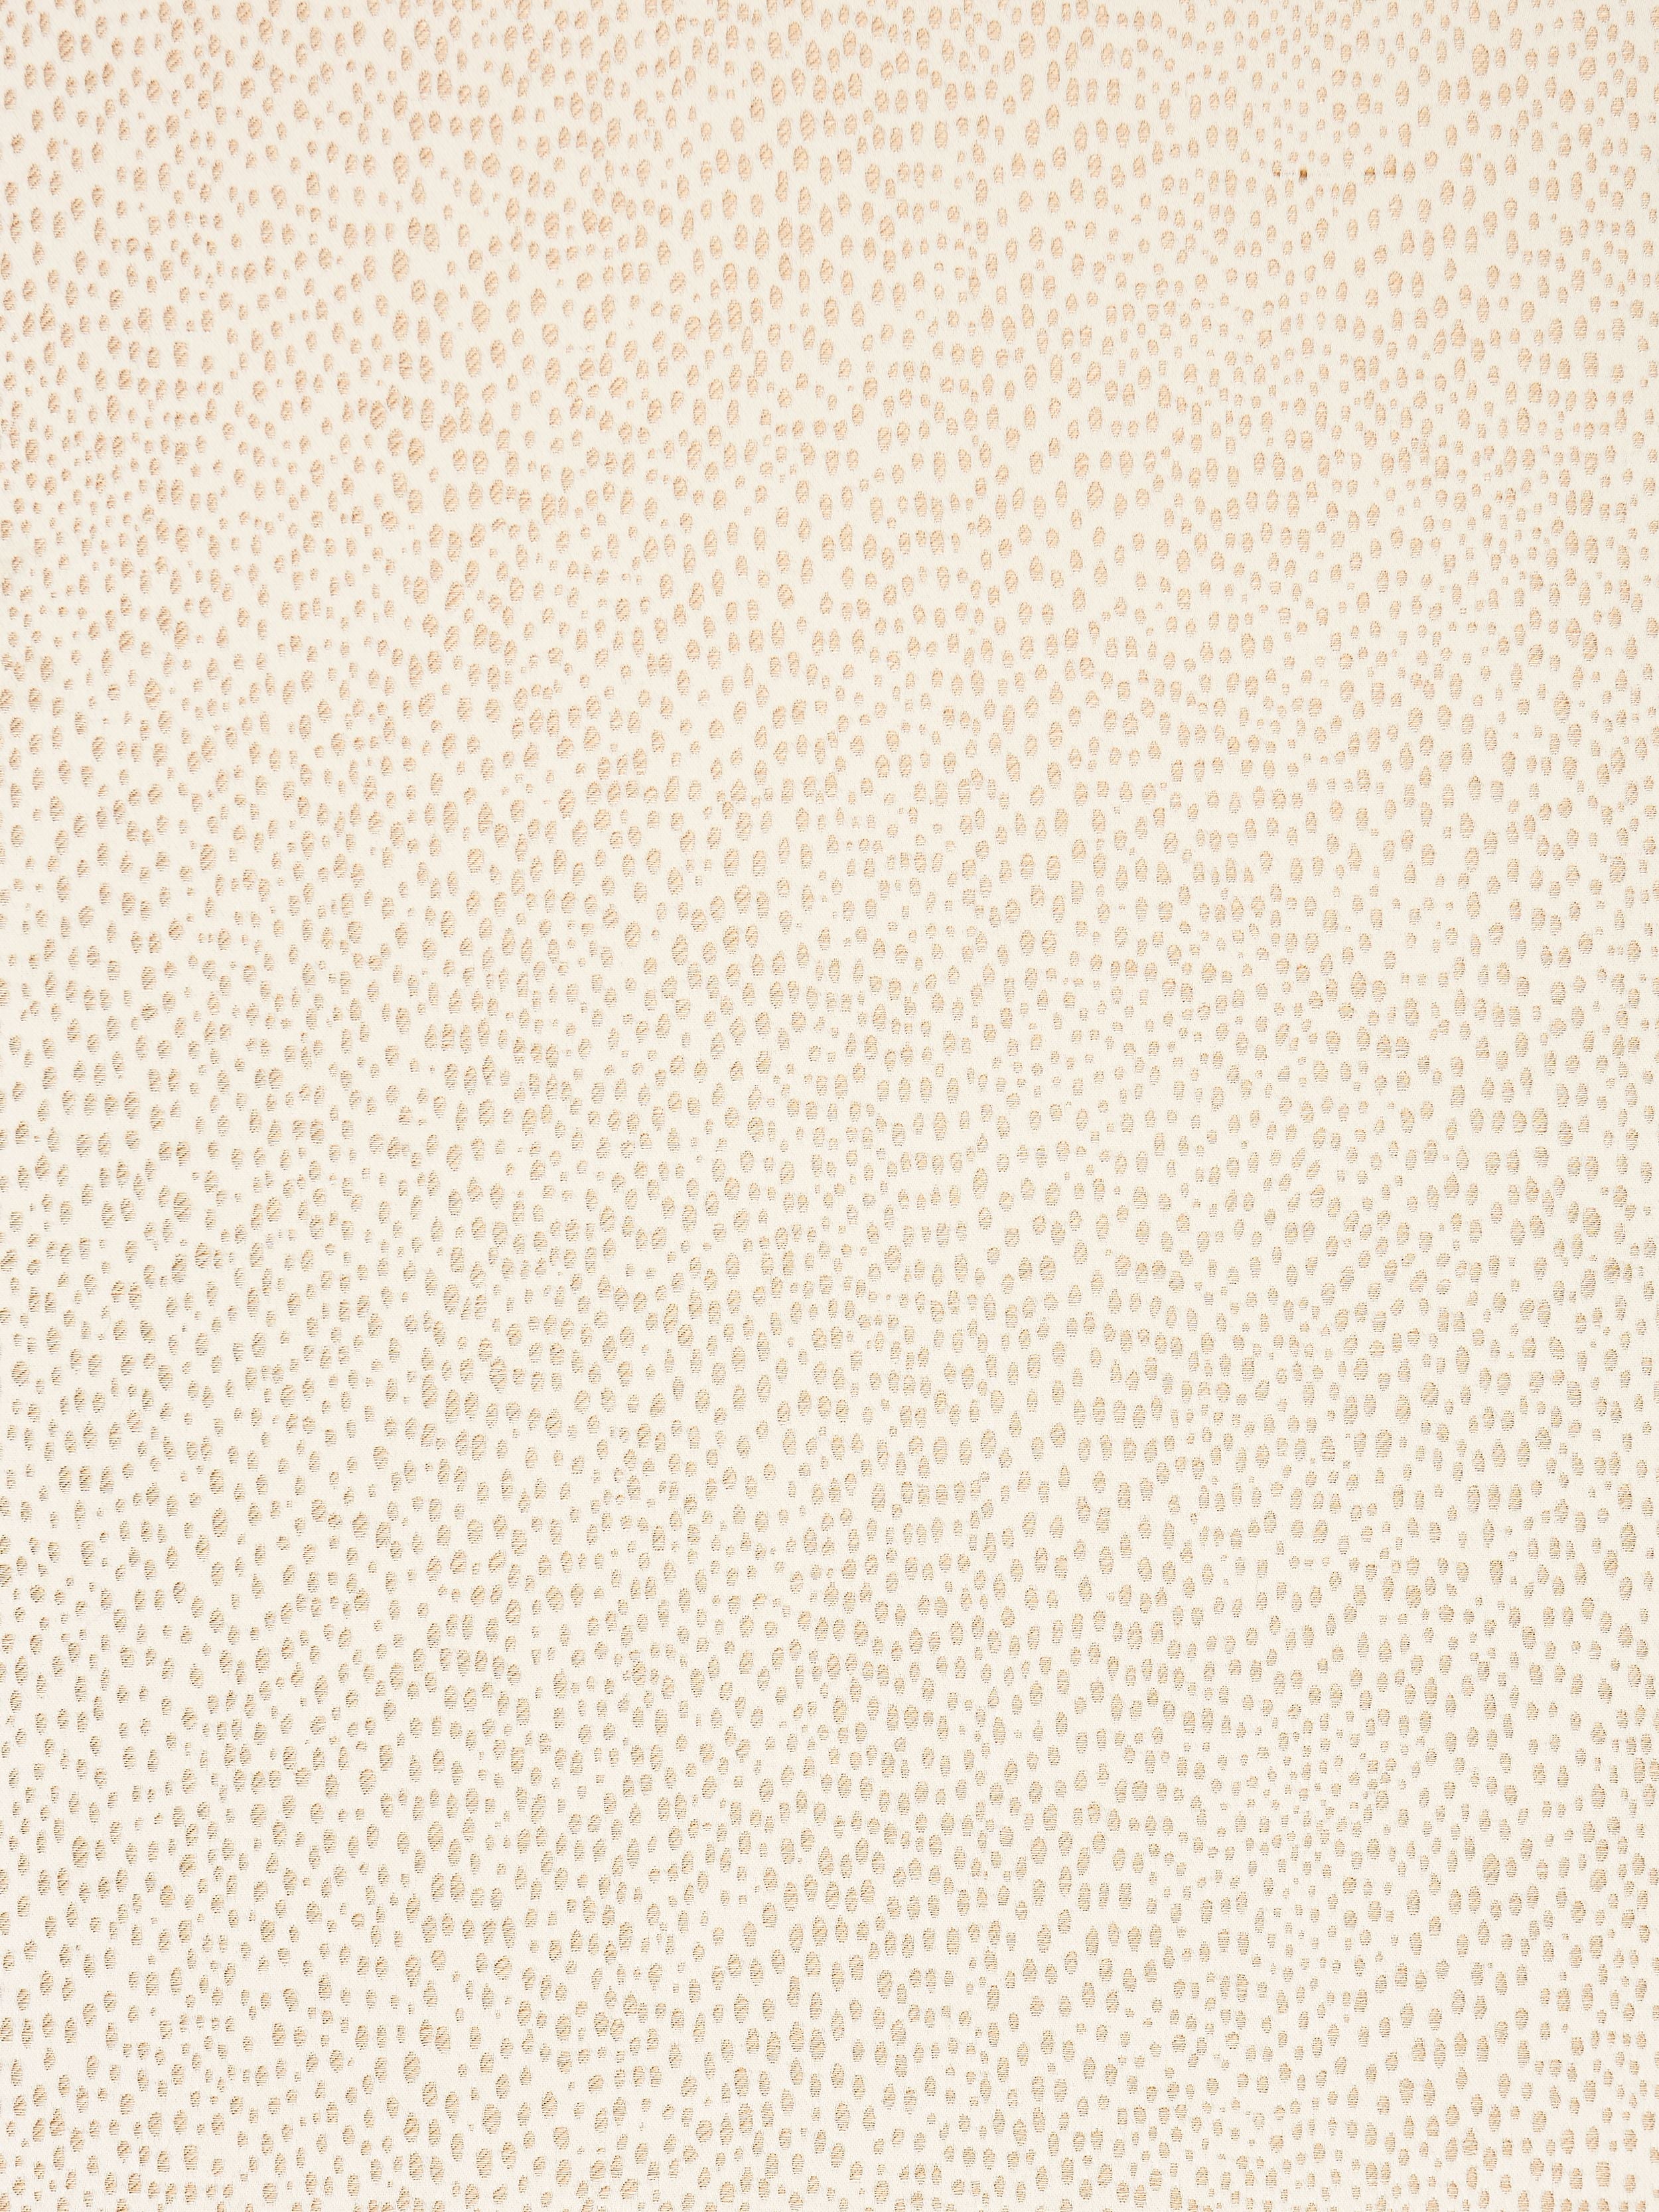 Raindrop fabric in sand color - pattern number SC 000127019 - by Scalamandre in the Scalamandre Fabrics Book 1 collection